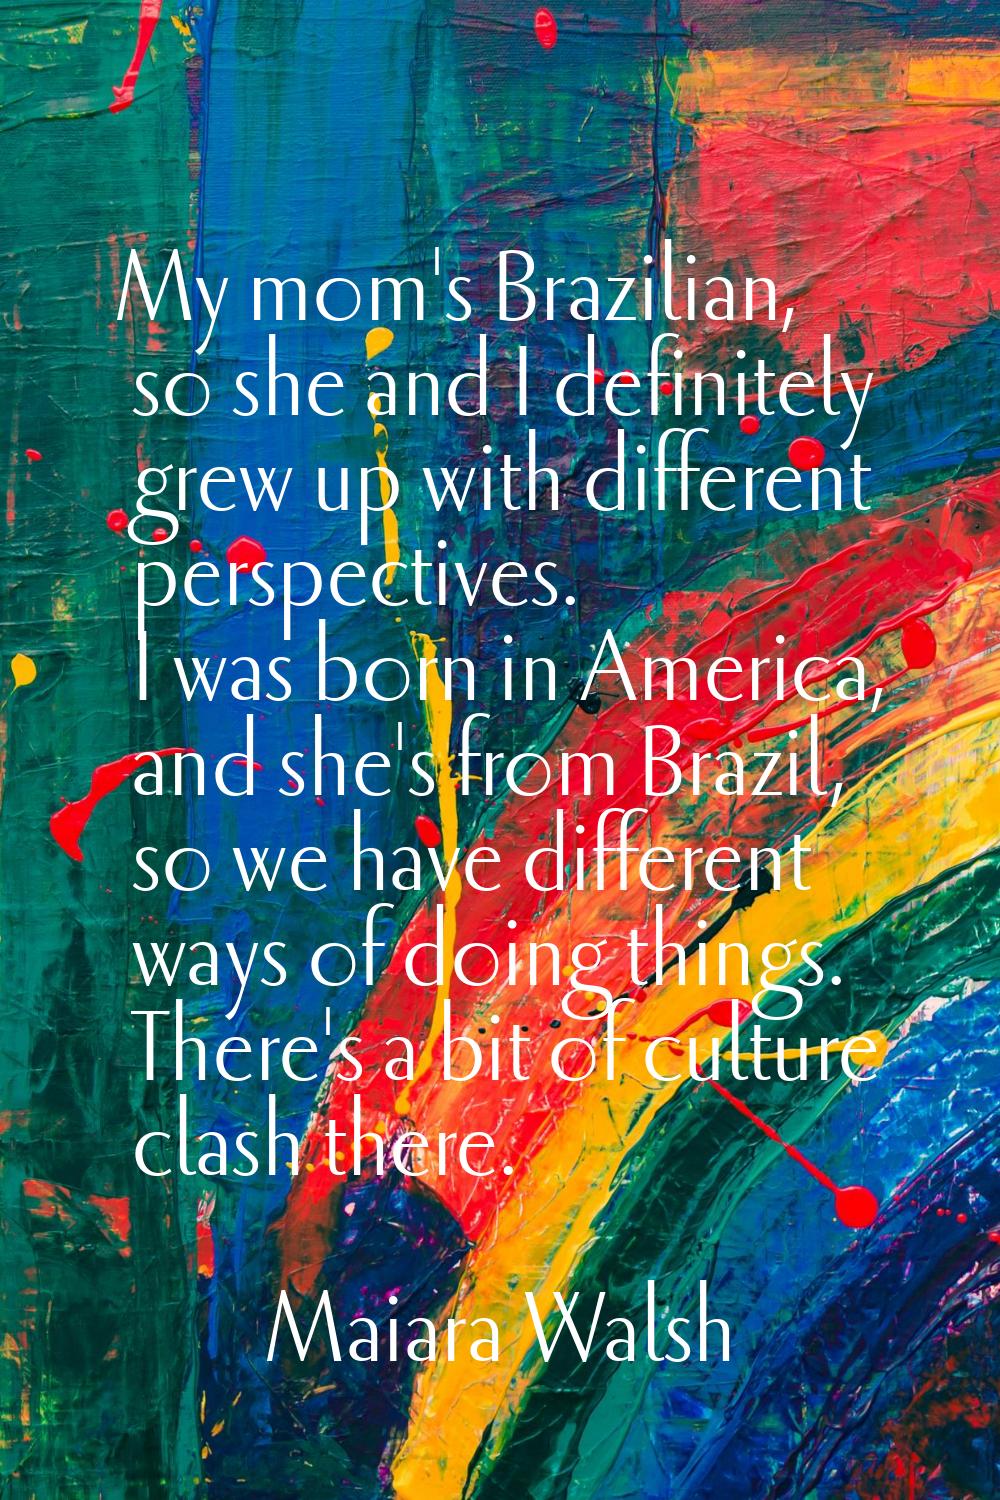 My mom's Brazilian, so she and I definitely grew up with different perspectives. I was born in Amer